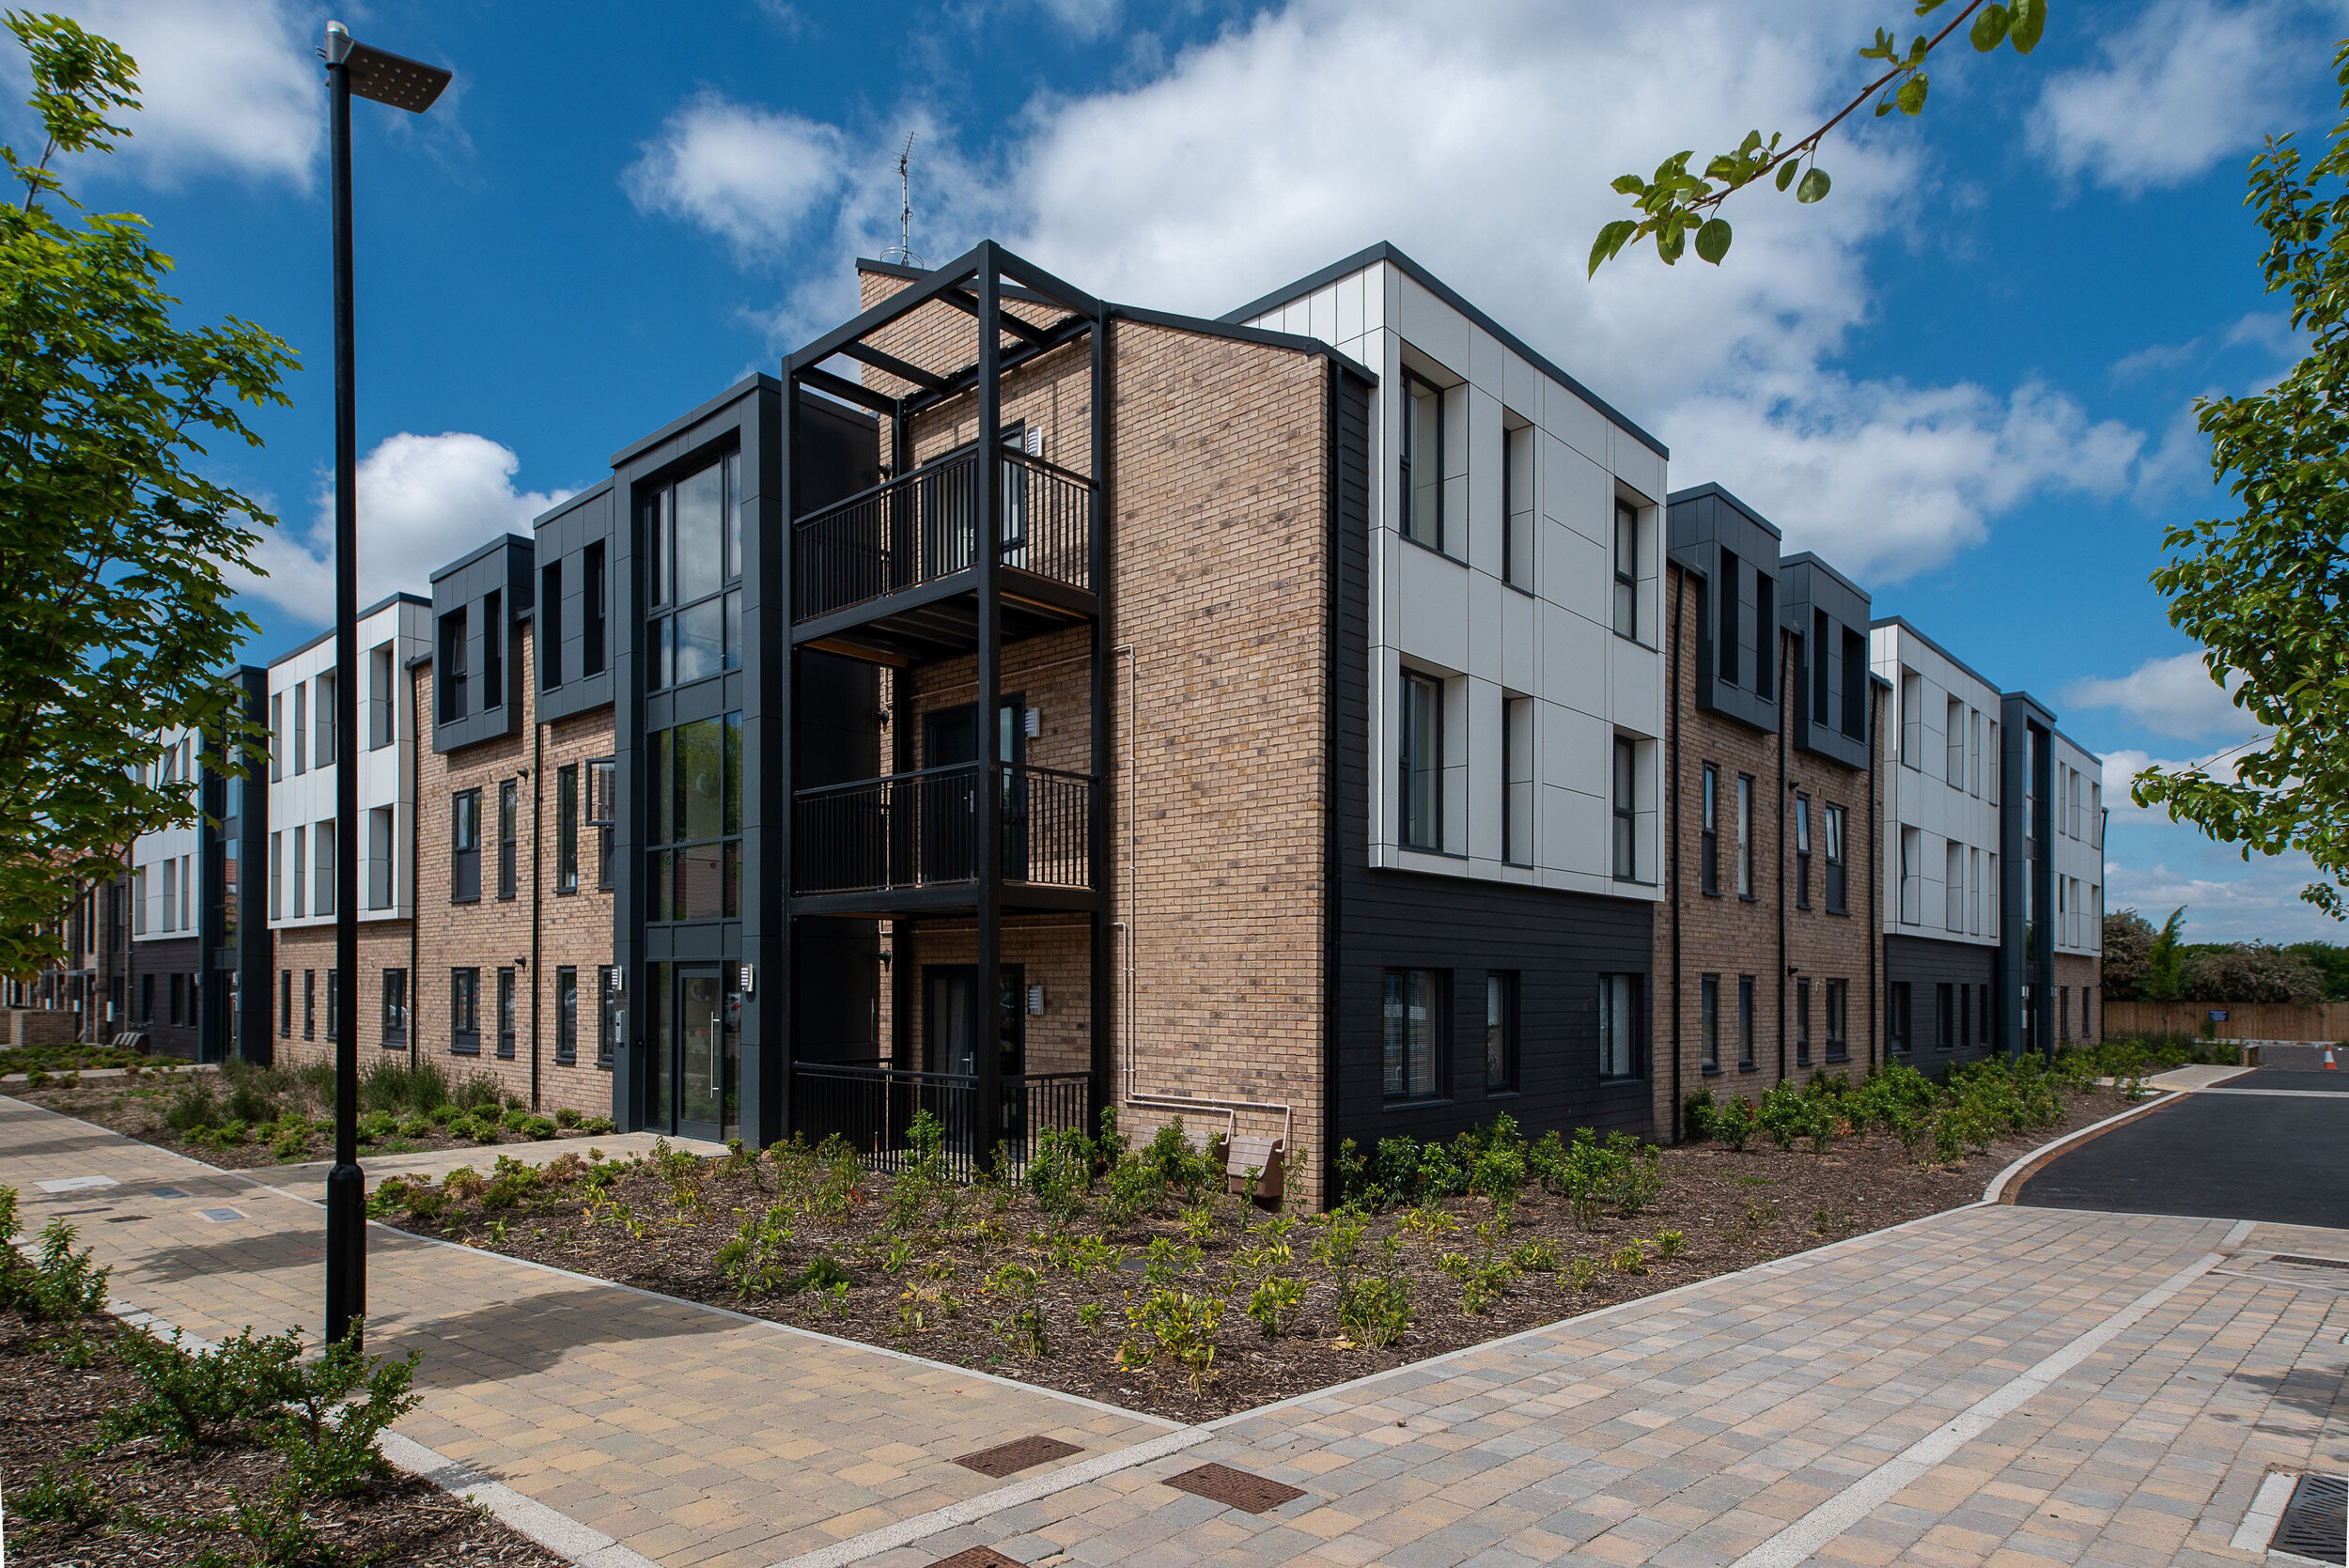 Three storey block of apartments with contrasting white and black cladding